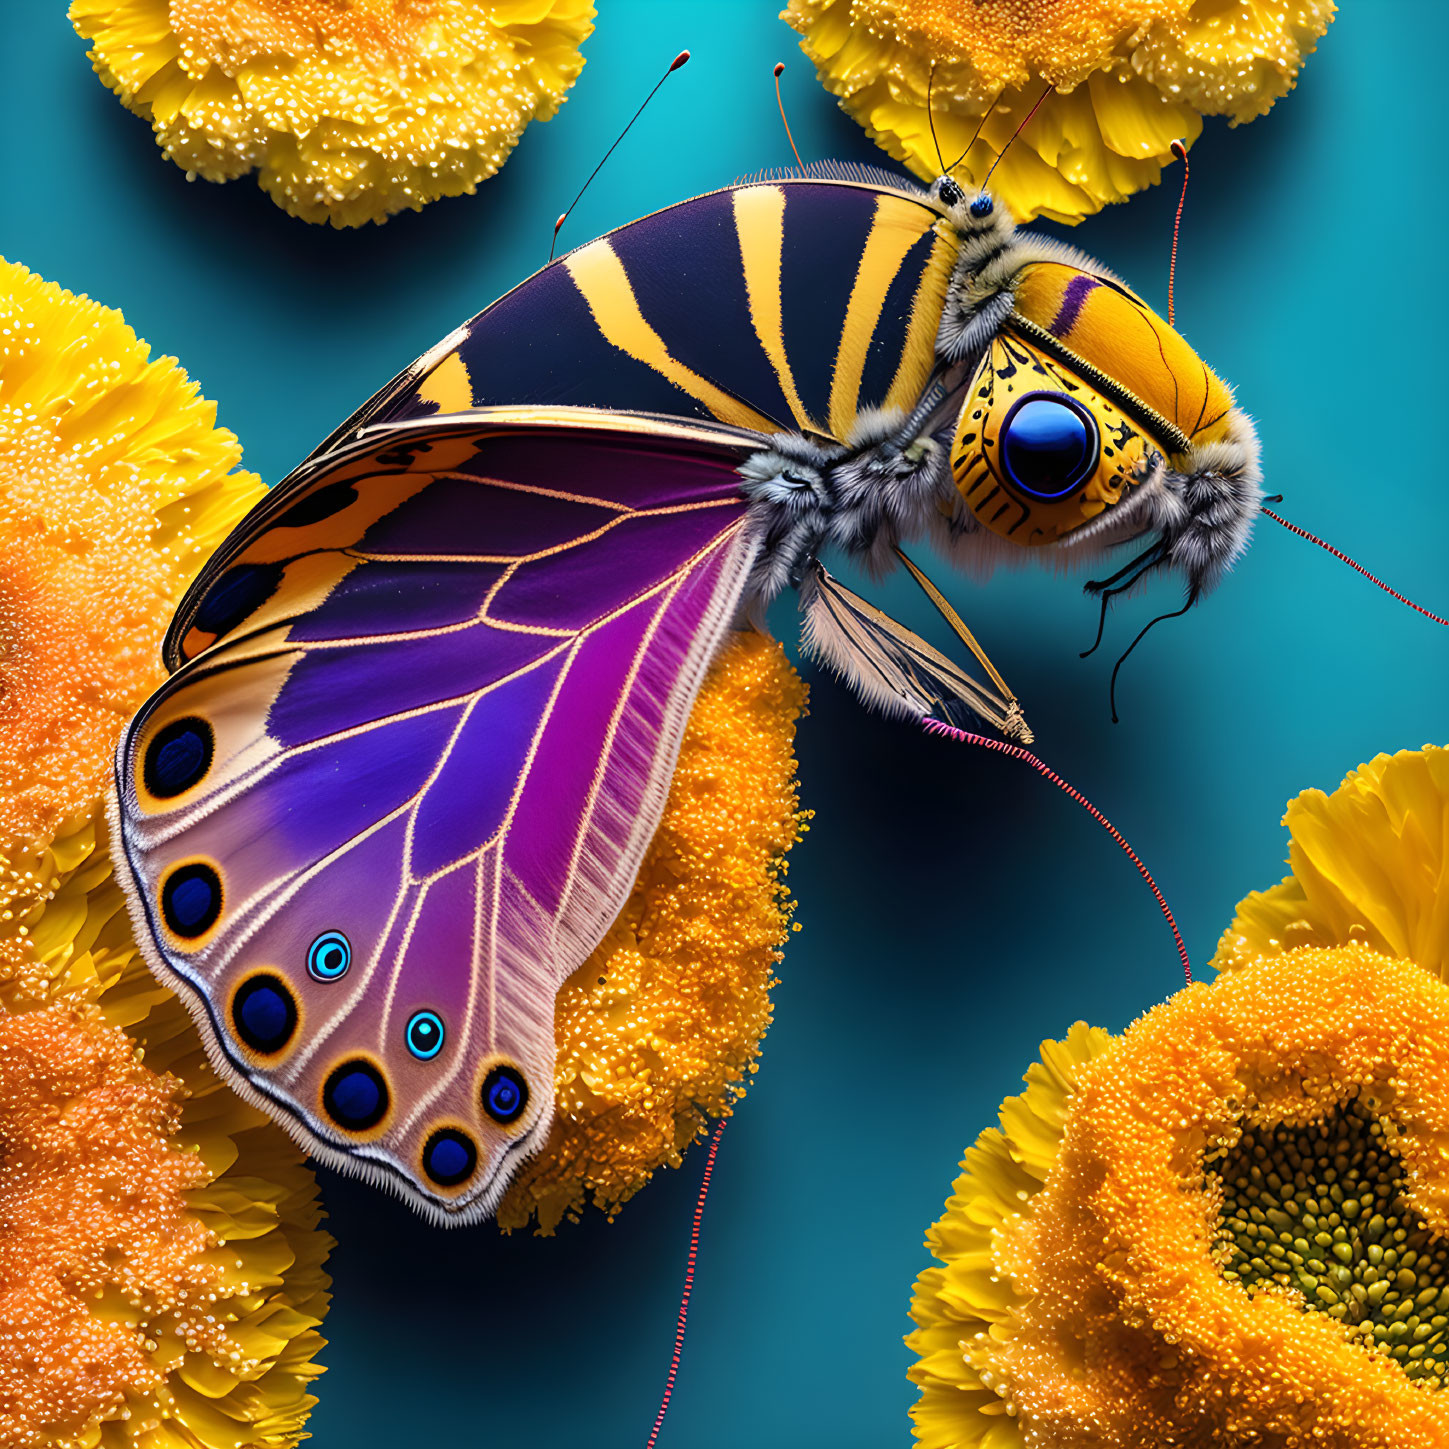 Colorful Butterfly Resting on Yellow Flowers and Teal Background